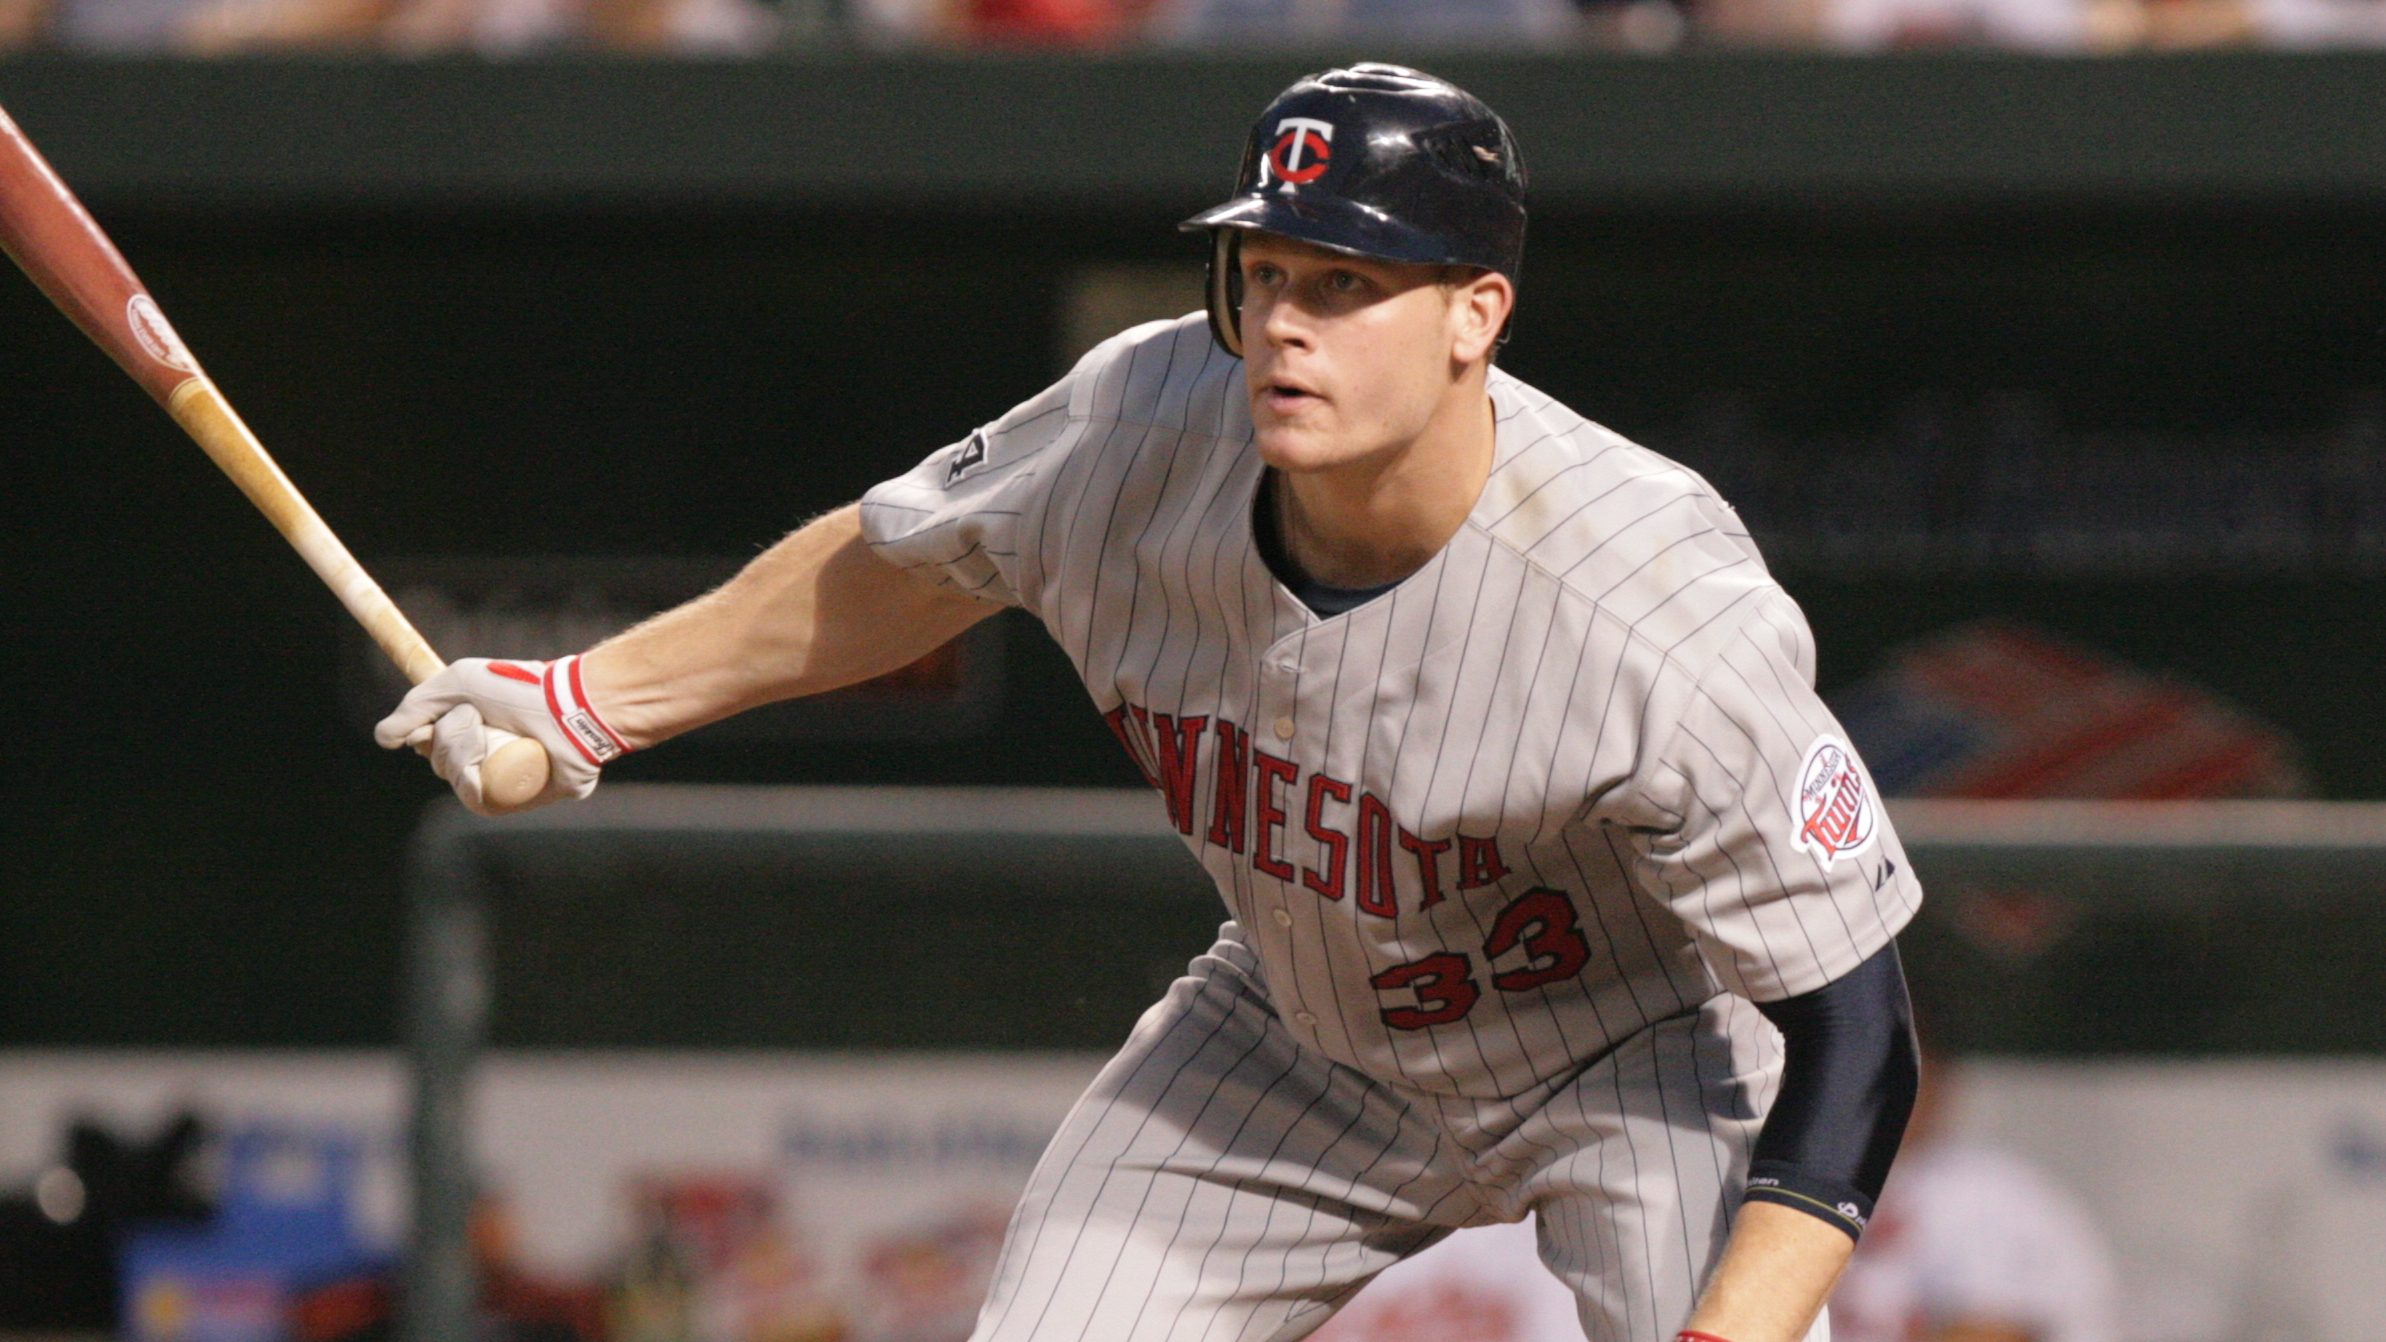 But What Do I Know? . . . Justin Morneau, Larry Walker, Vernon